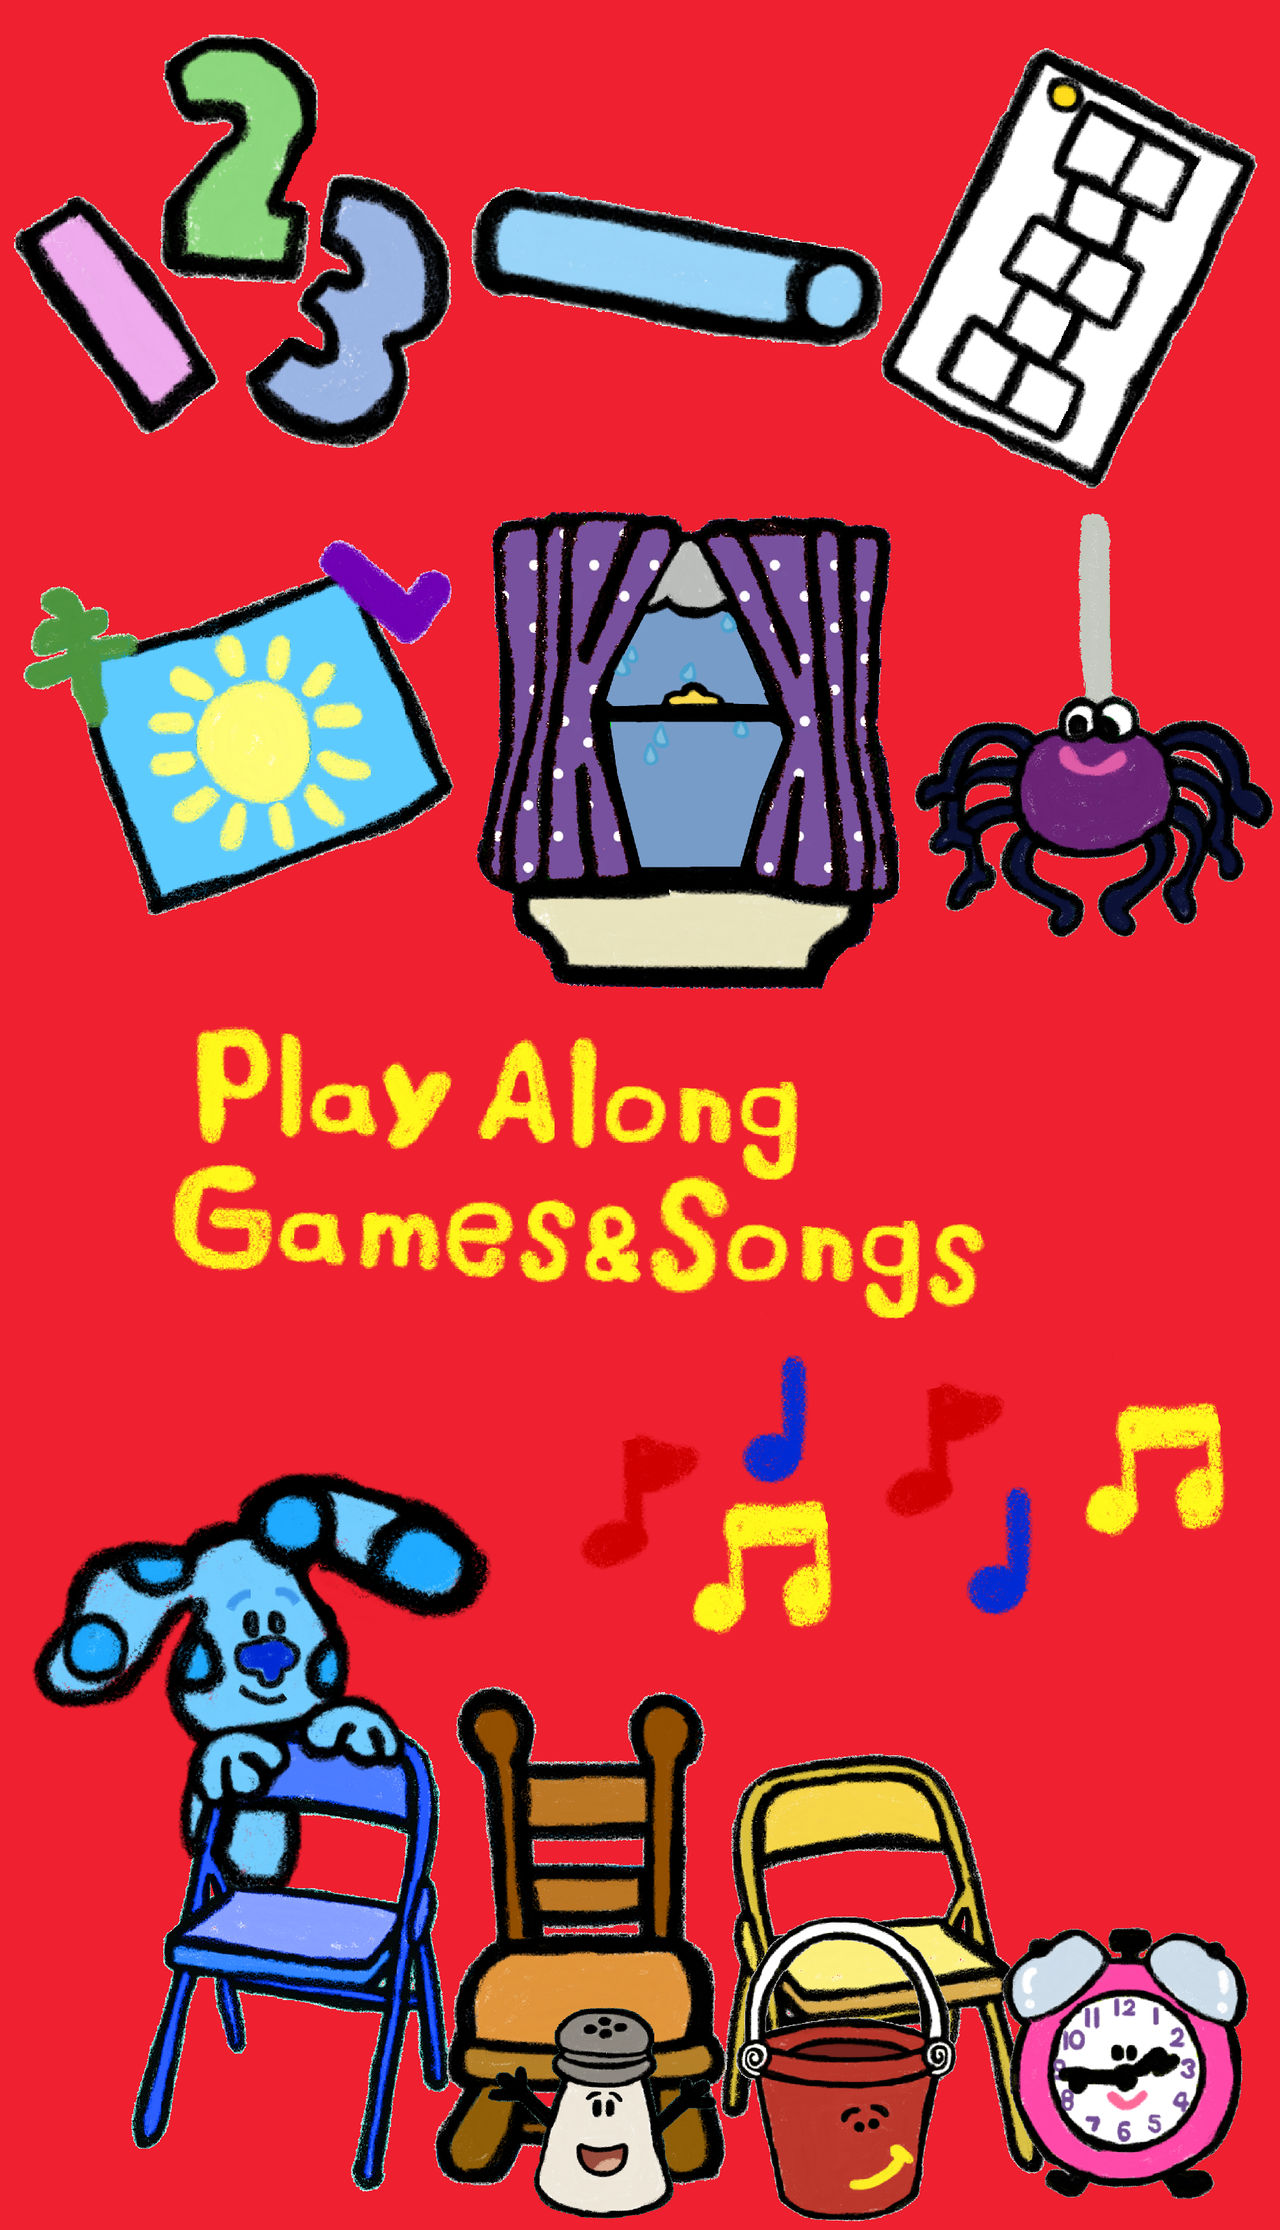 Play Along Games And Songs Vhs By Alexanderbex On Deviantart